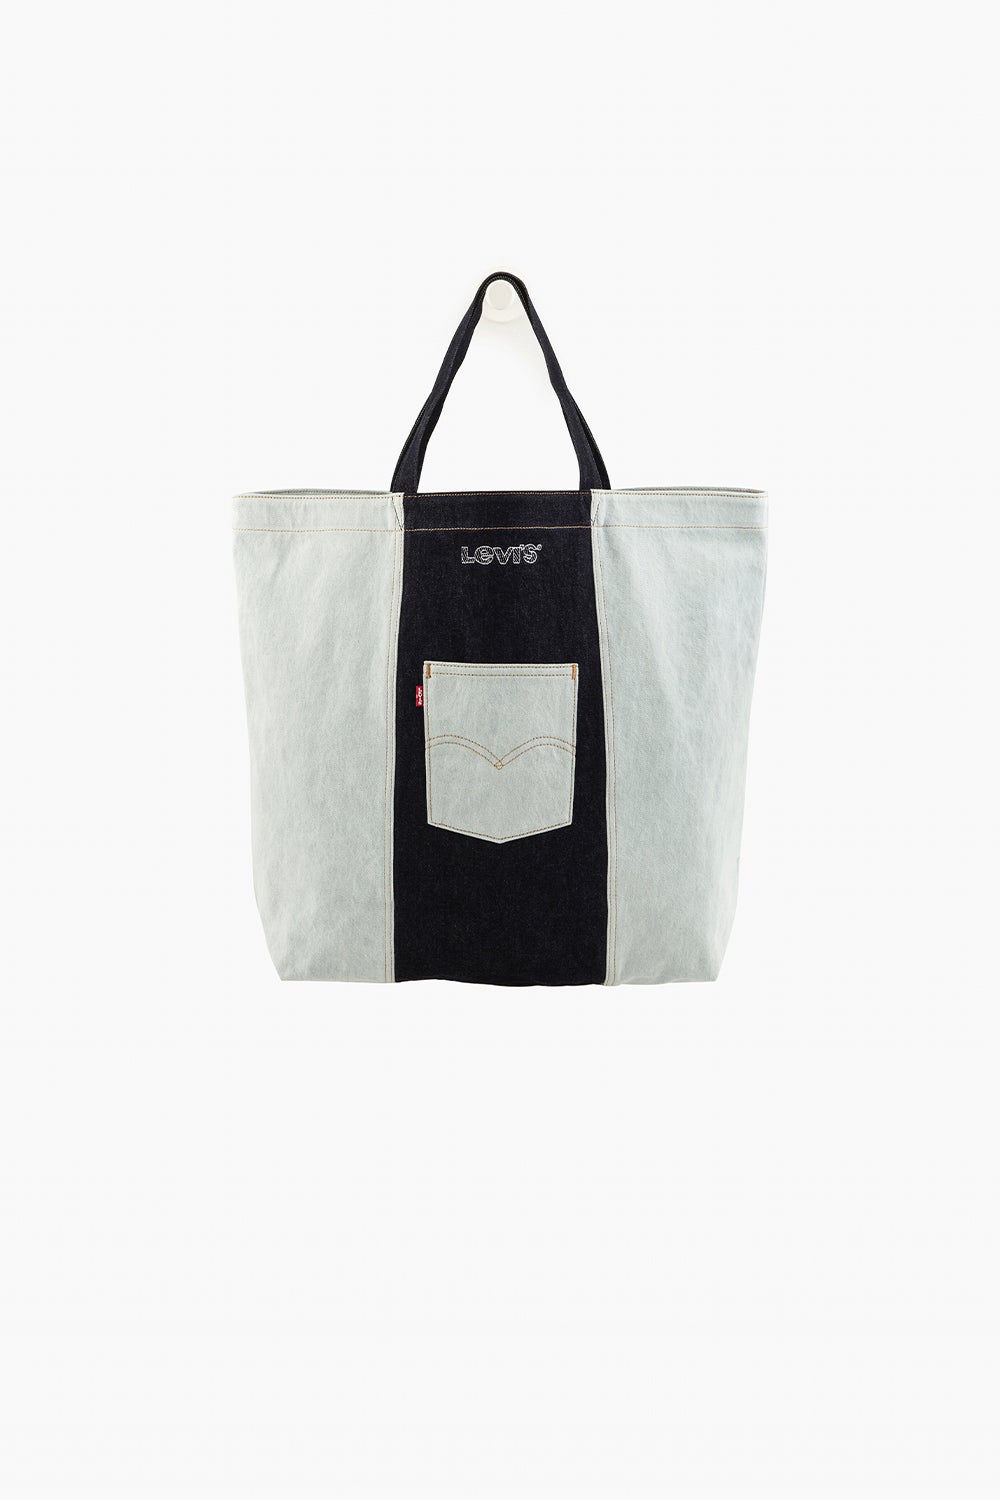 Levi's Pocketed Tote White